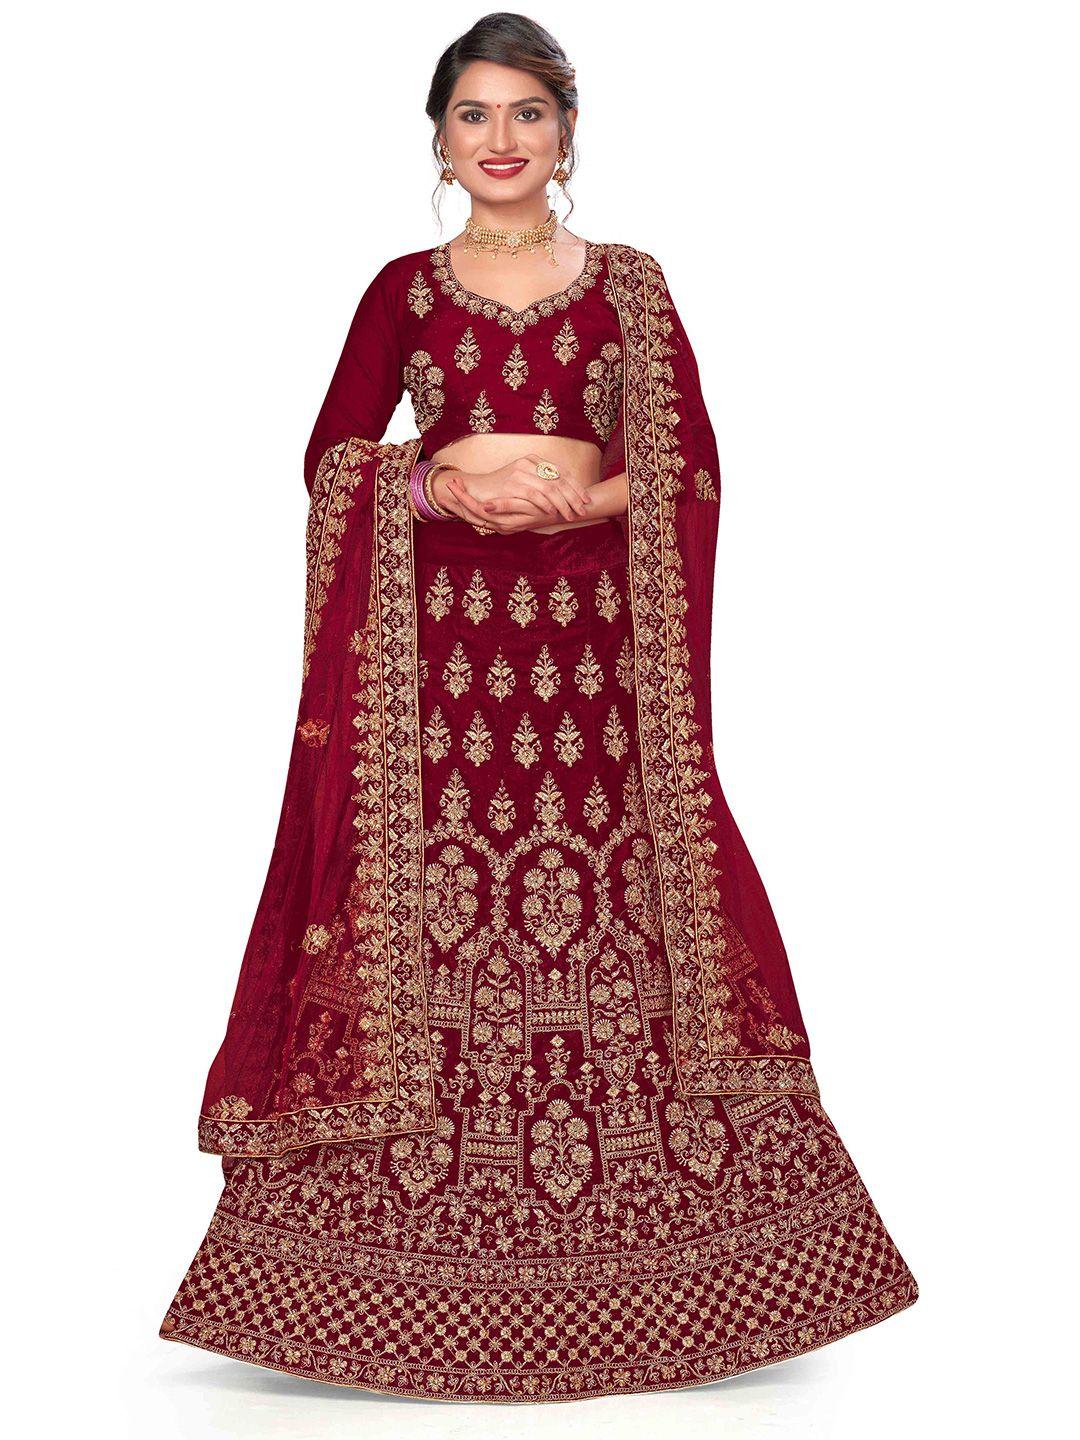 manvaa-maroon-&-gold-toned-embroidered-thread-work-semi-stitched-lehenga-&-unstitched-blouse-with-dupatta